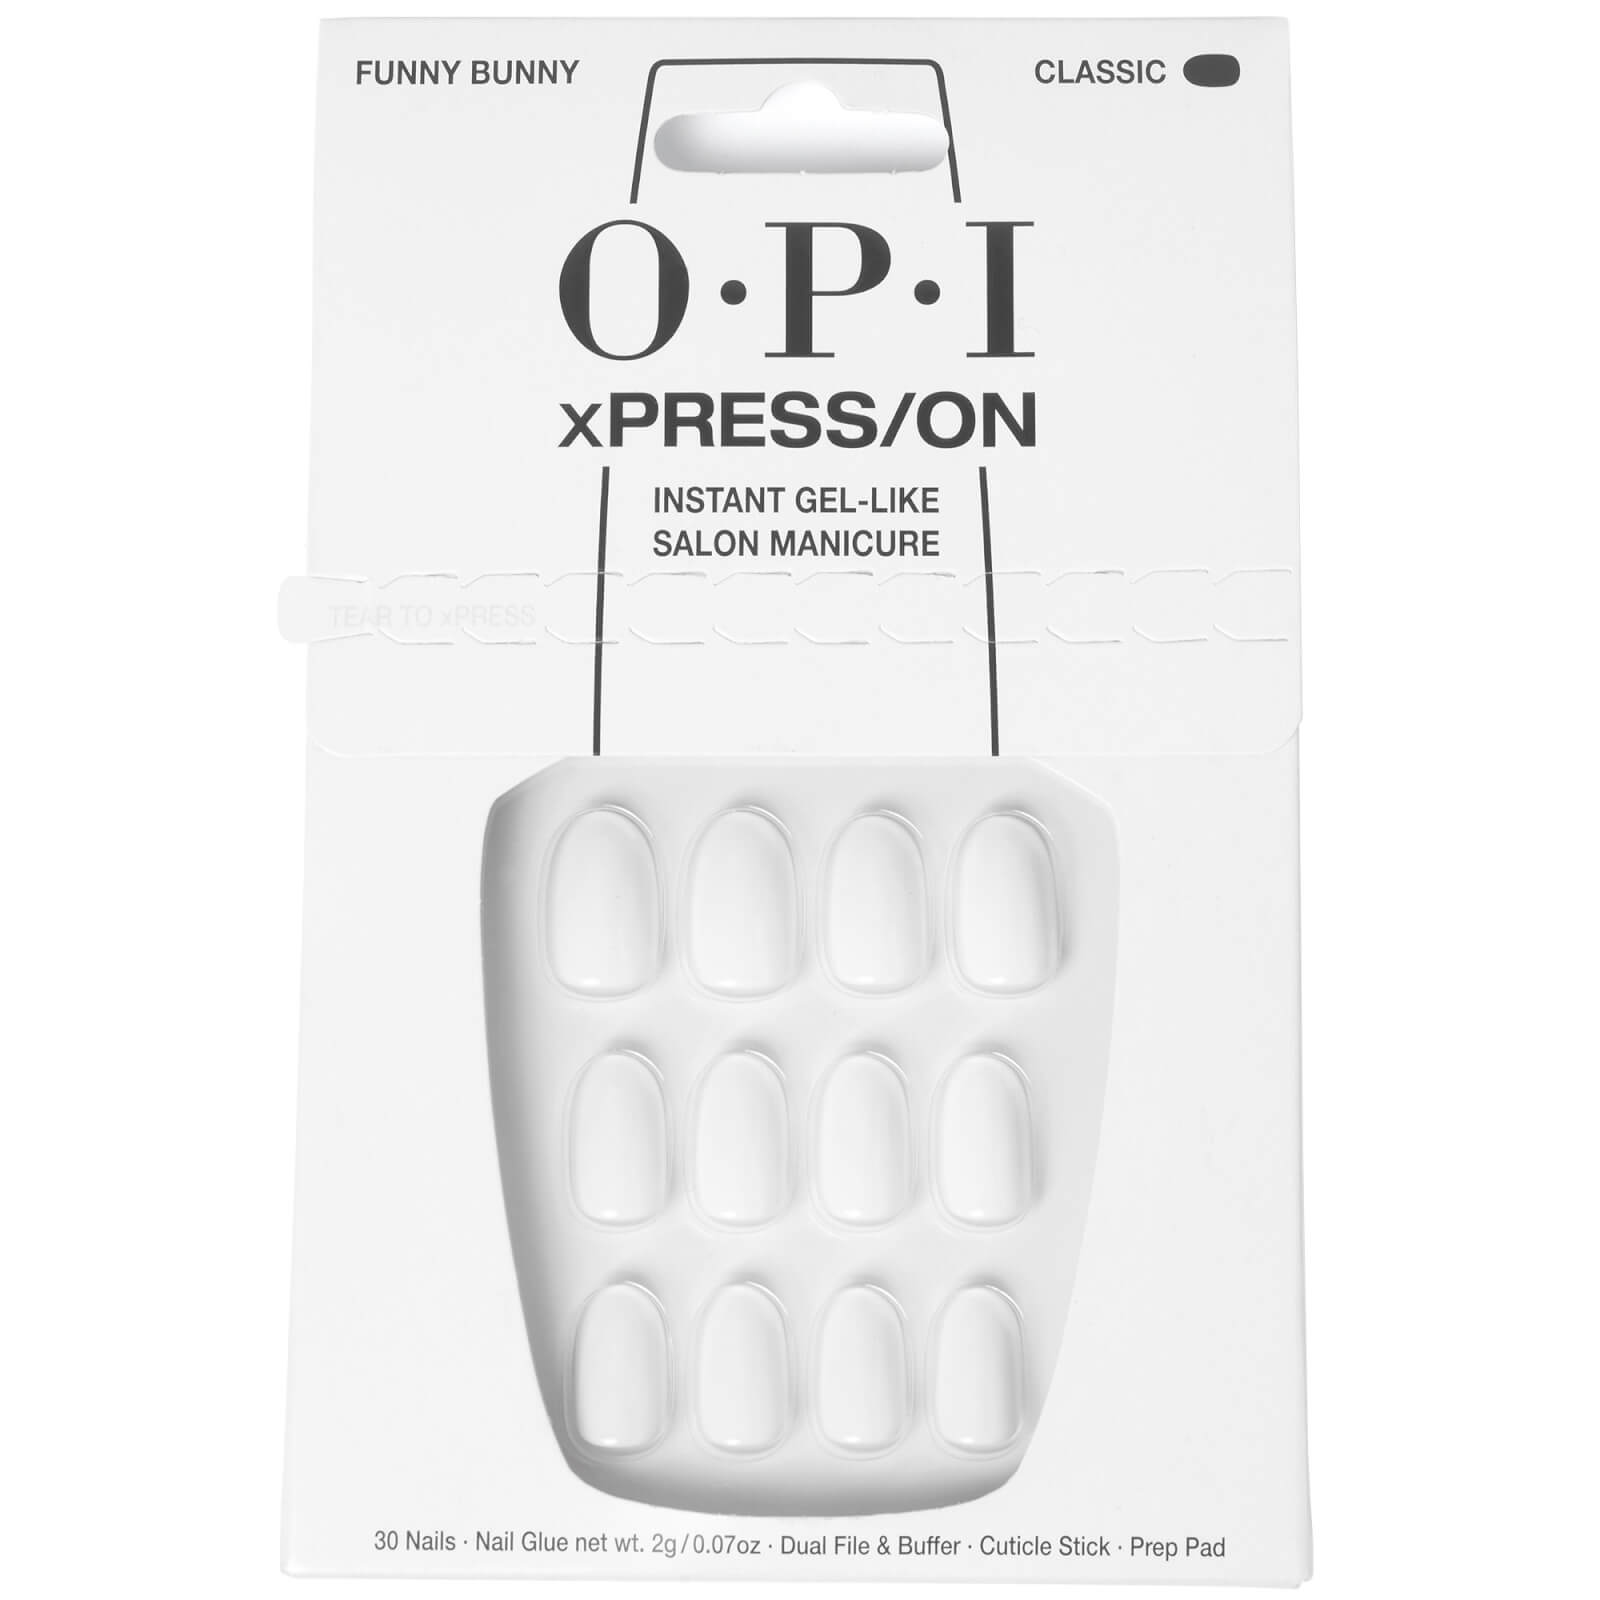 OPI xPRESS/ON - Funny Bunny Press On Nails Gel-Like Salon Manicure - EXCLUSIVE